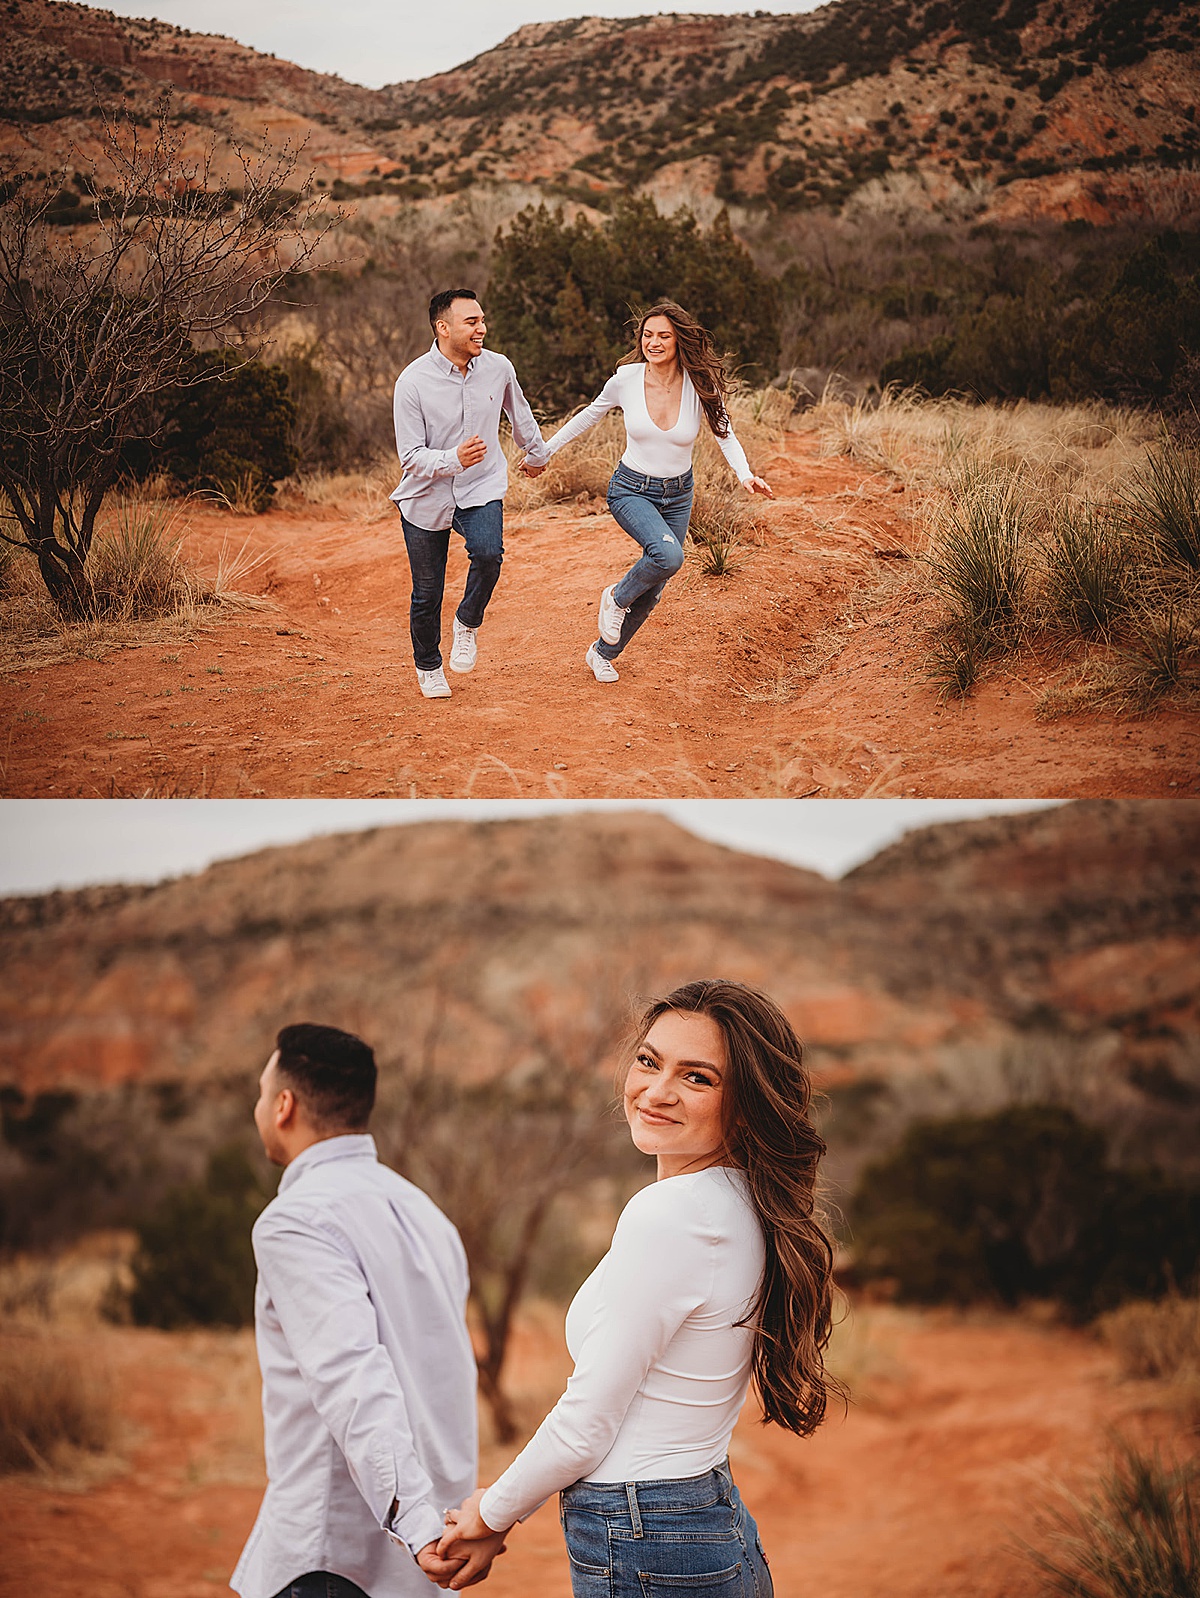 couple in jeans and sneakers runs across red dirt while laughing in canyon adventure engagement shoot